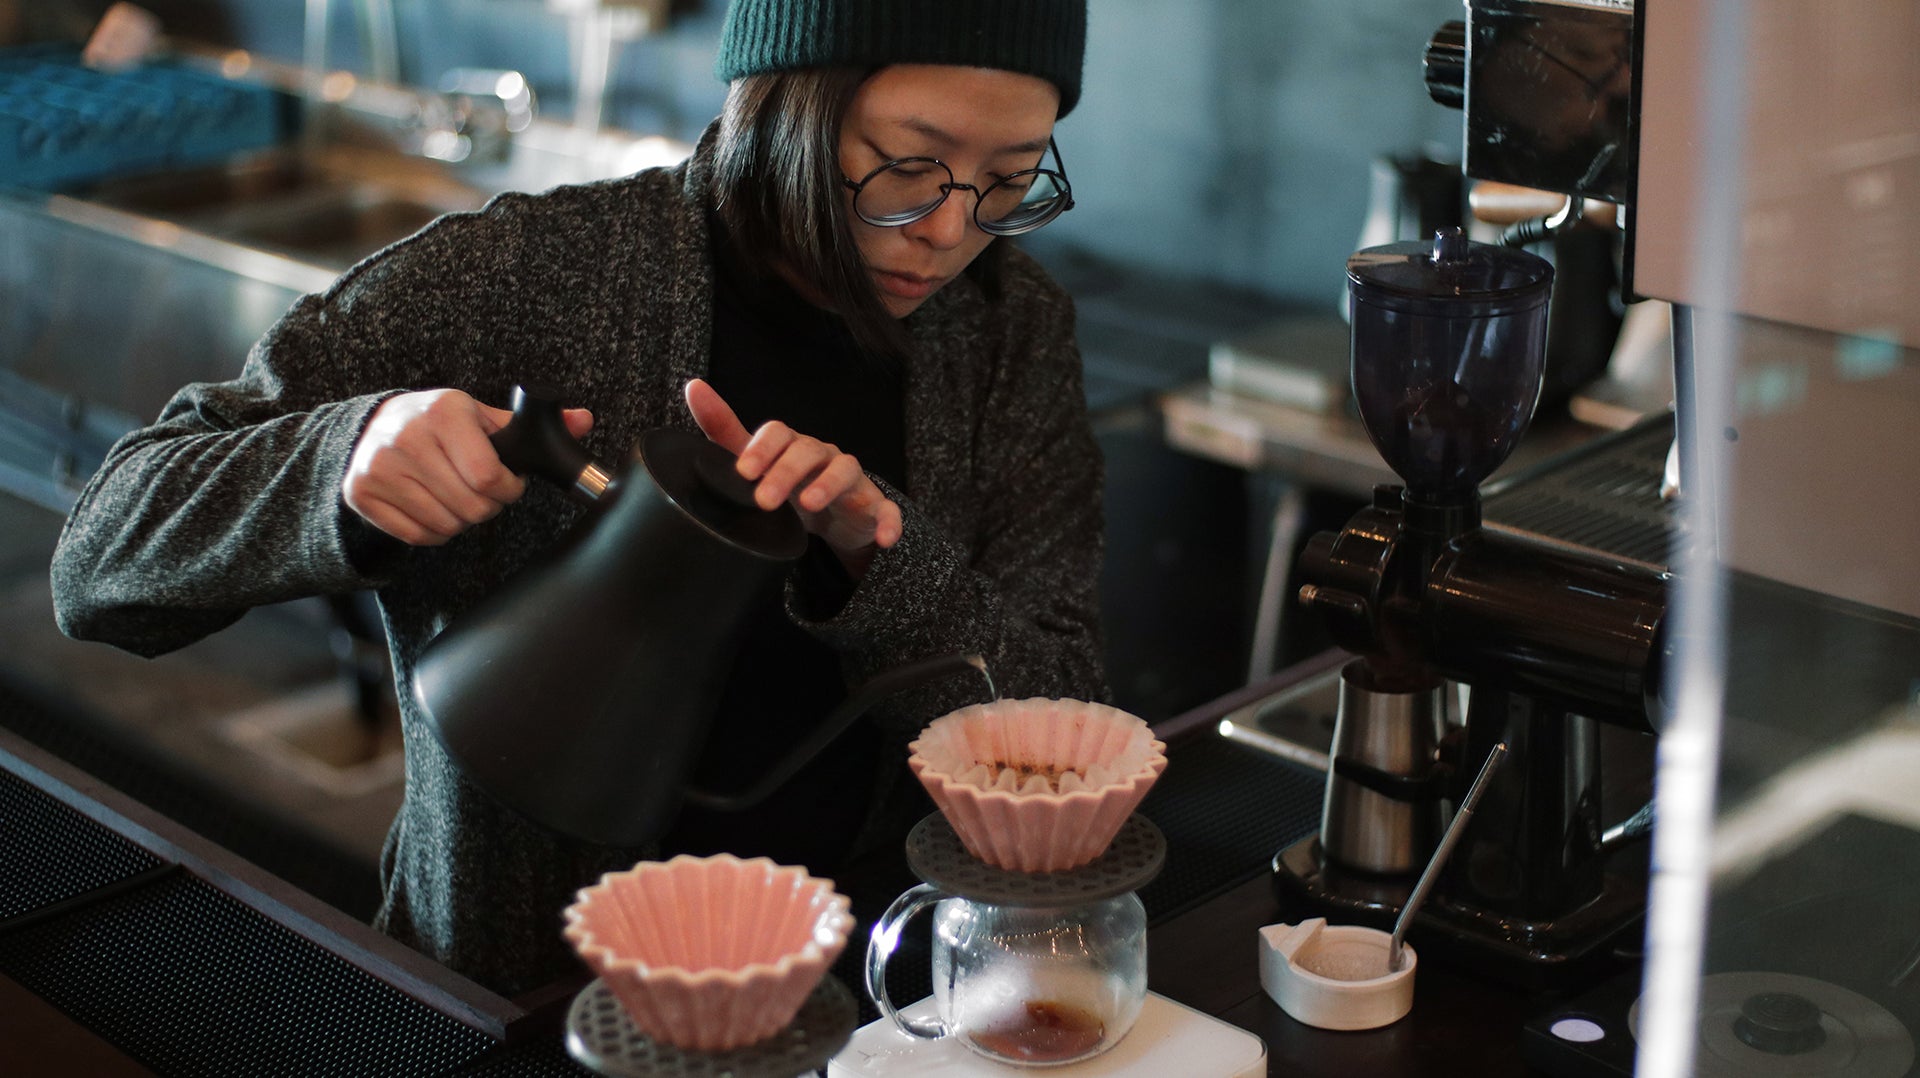 Load video: Video of our cafe. Pour-overs, espresso, and specialty teas, all crafted with love.